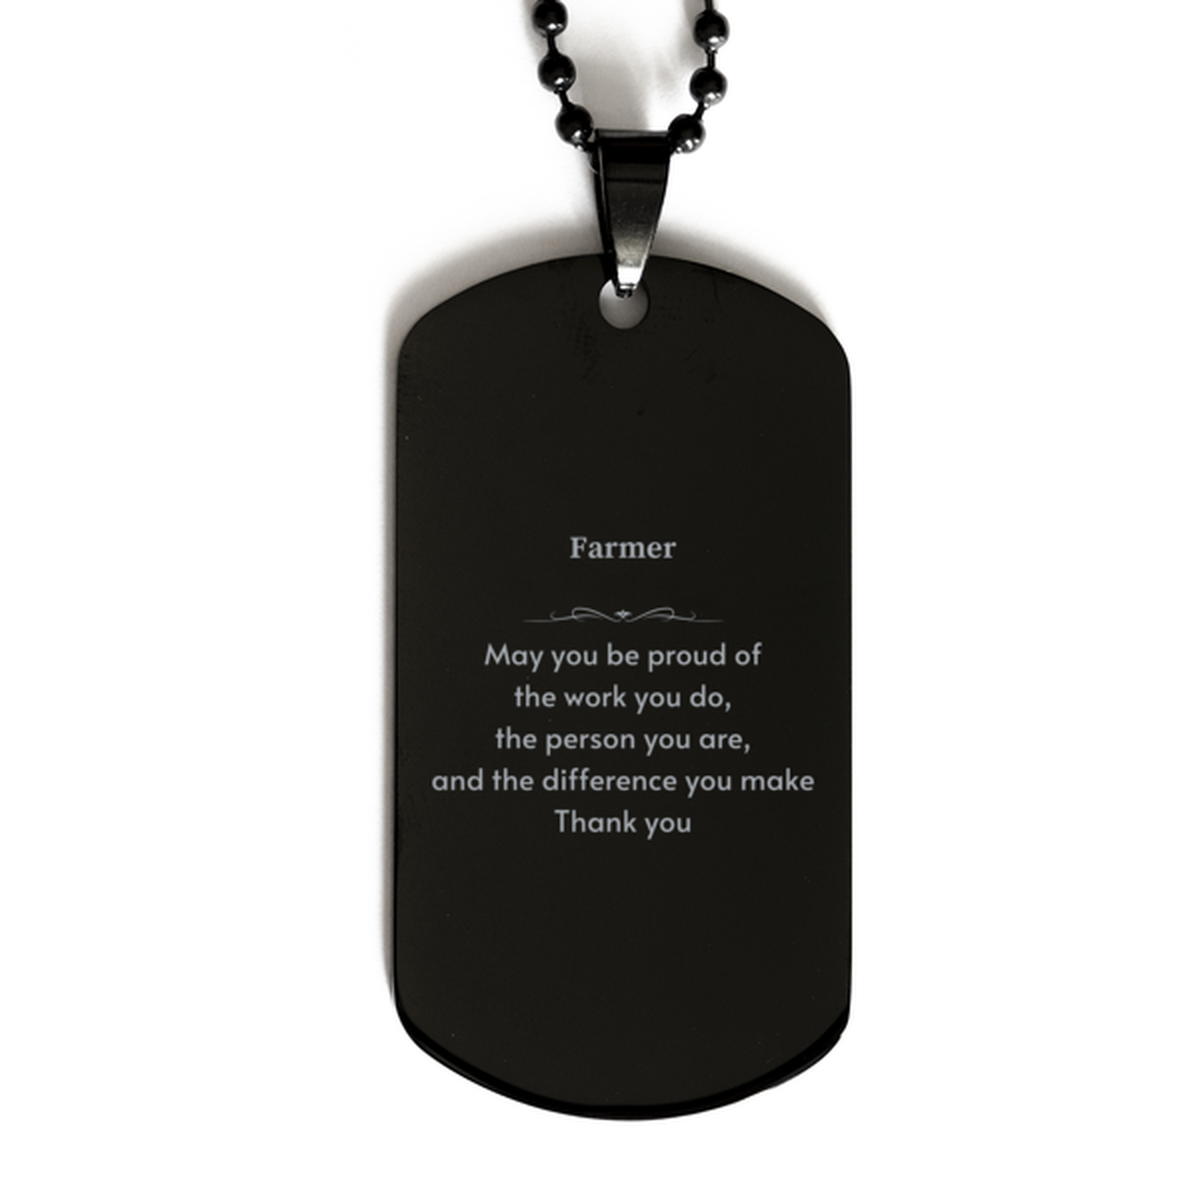 Heartwarming Black Dog Tag Retirement Coworkers Gifts for Farmer, Farmer May You be proud of the work you do, the person you are Gifts for Boss Men Women Friends